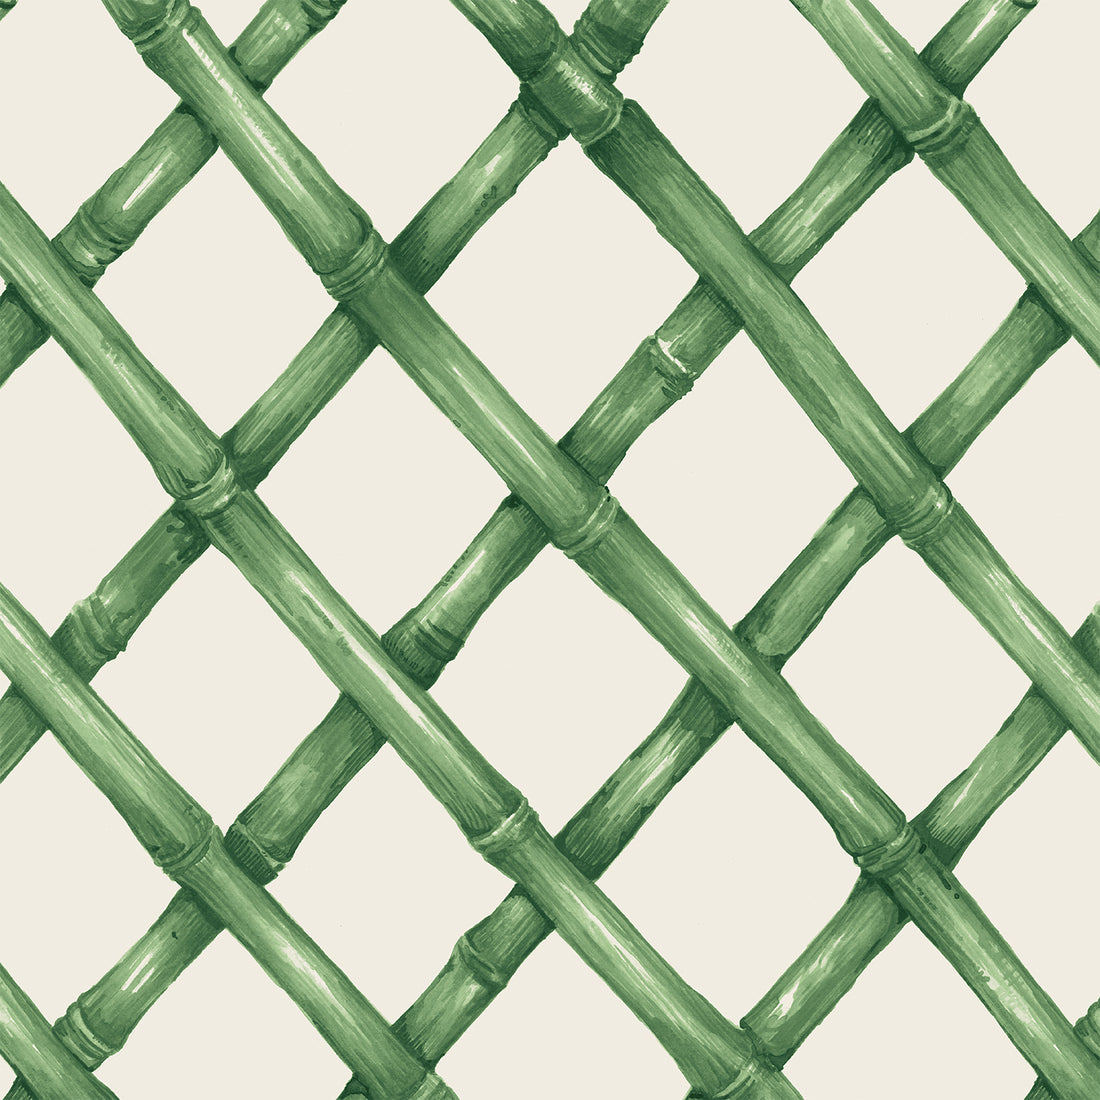 A Green Lattice Napkins pattern on a white background by Hester &amp; Cook.